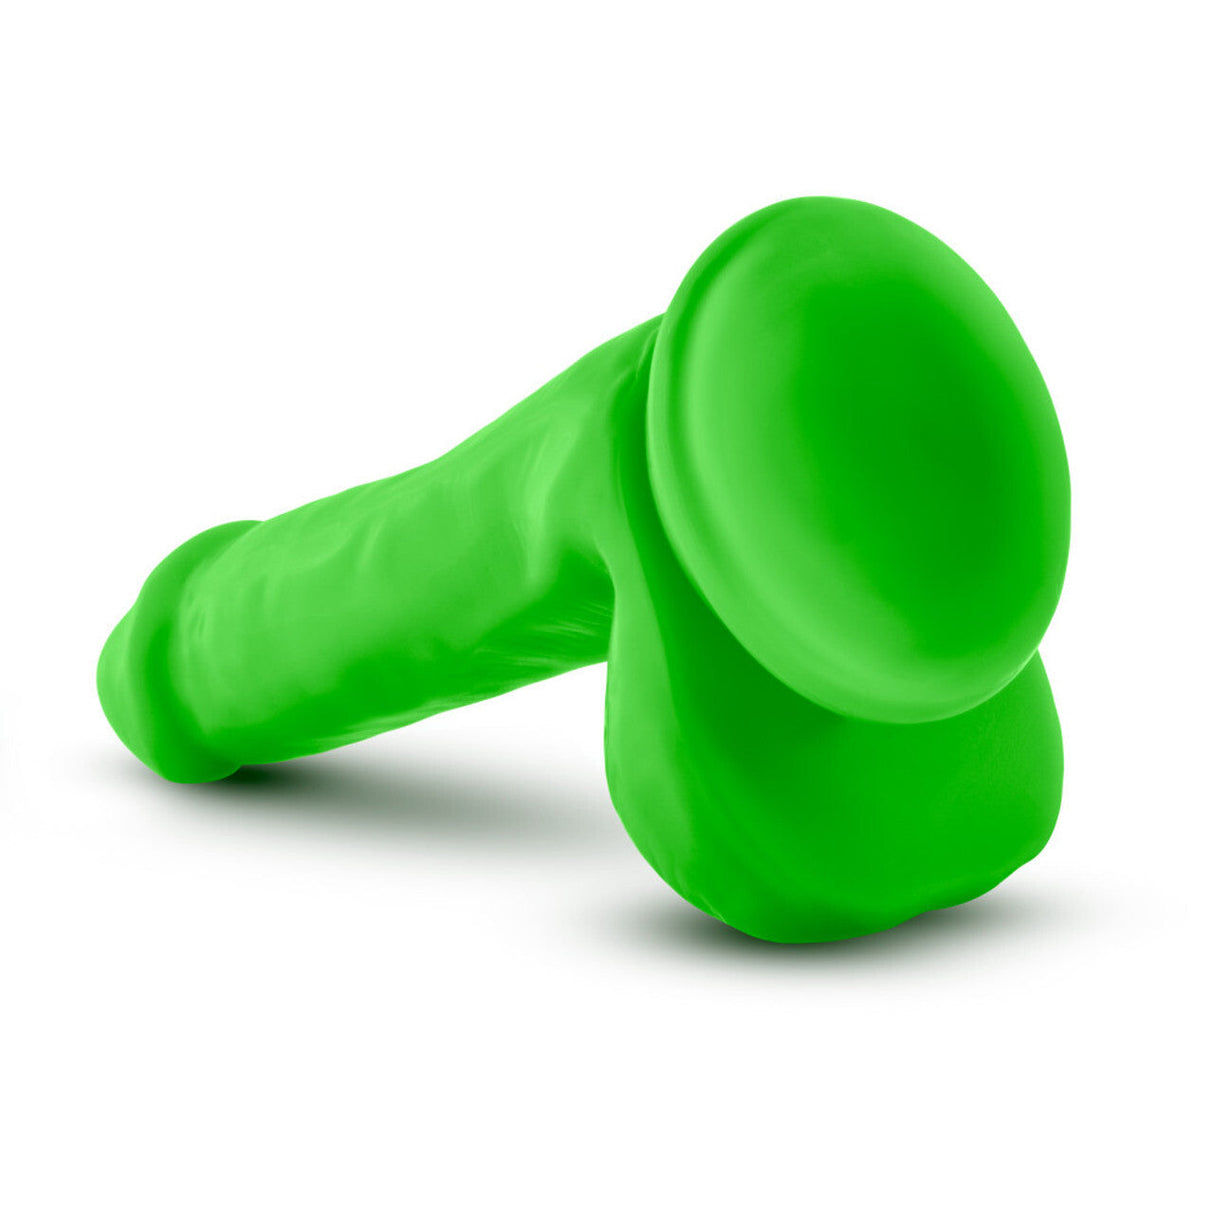 Blush Neo Elite 6 Inch Silicone Dual Density Cock with Balls